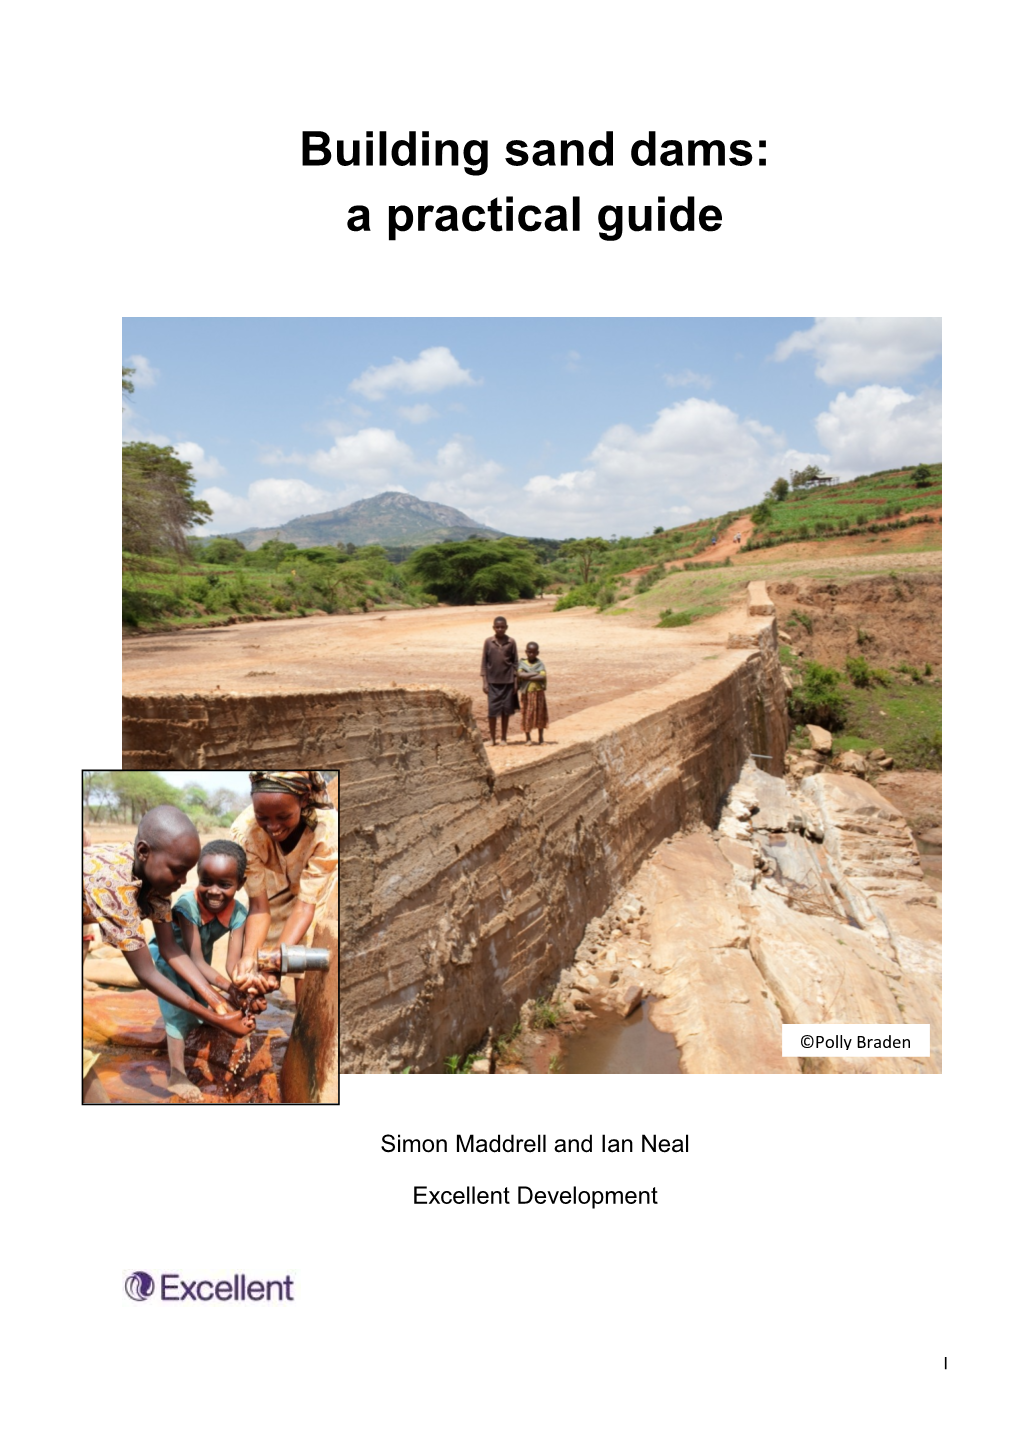 Building Sand Dams: a Practical Guide